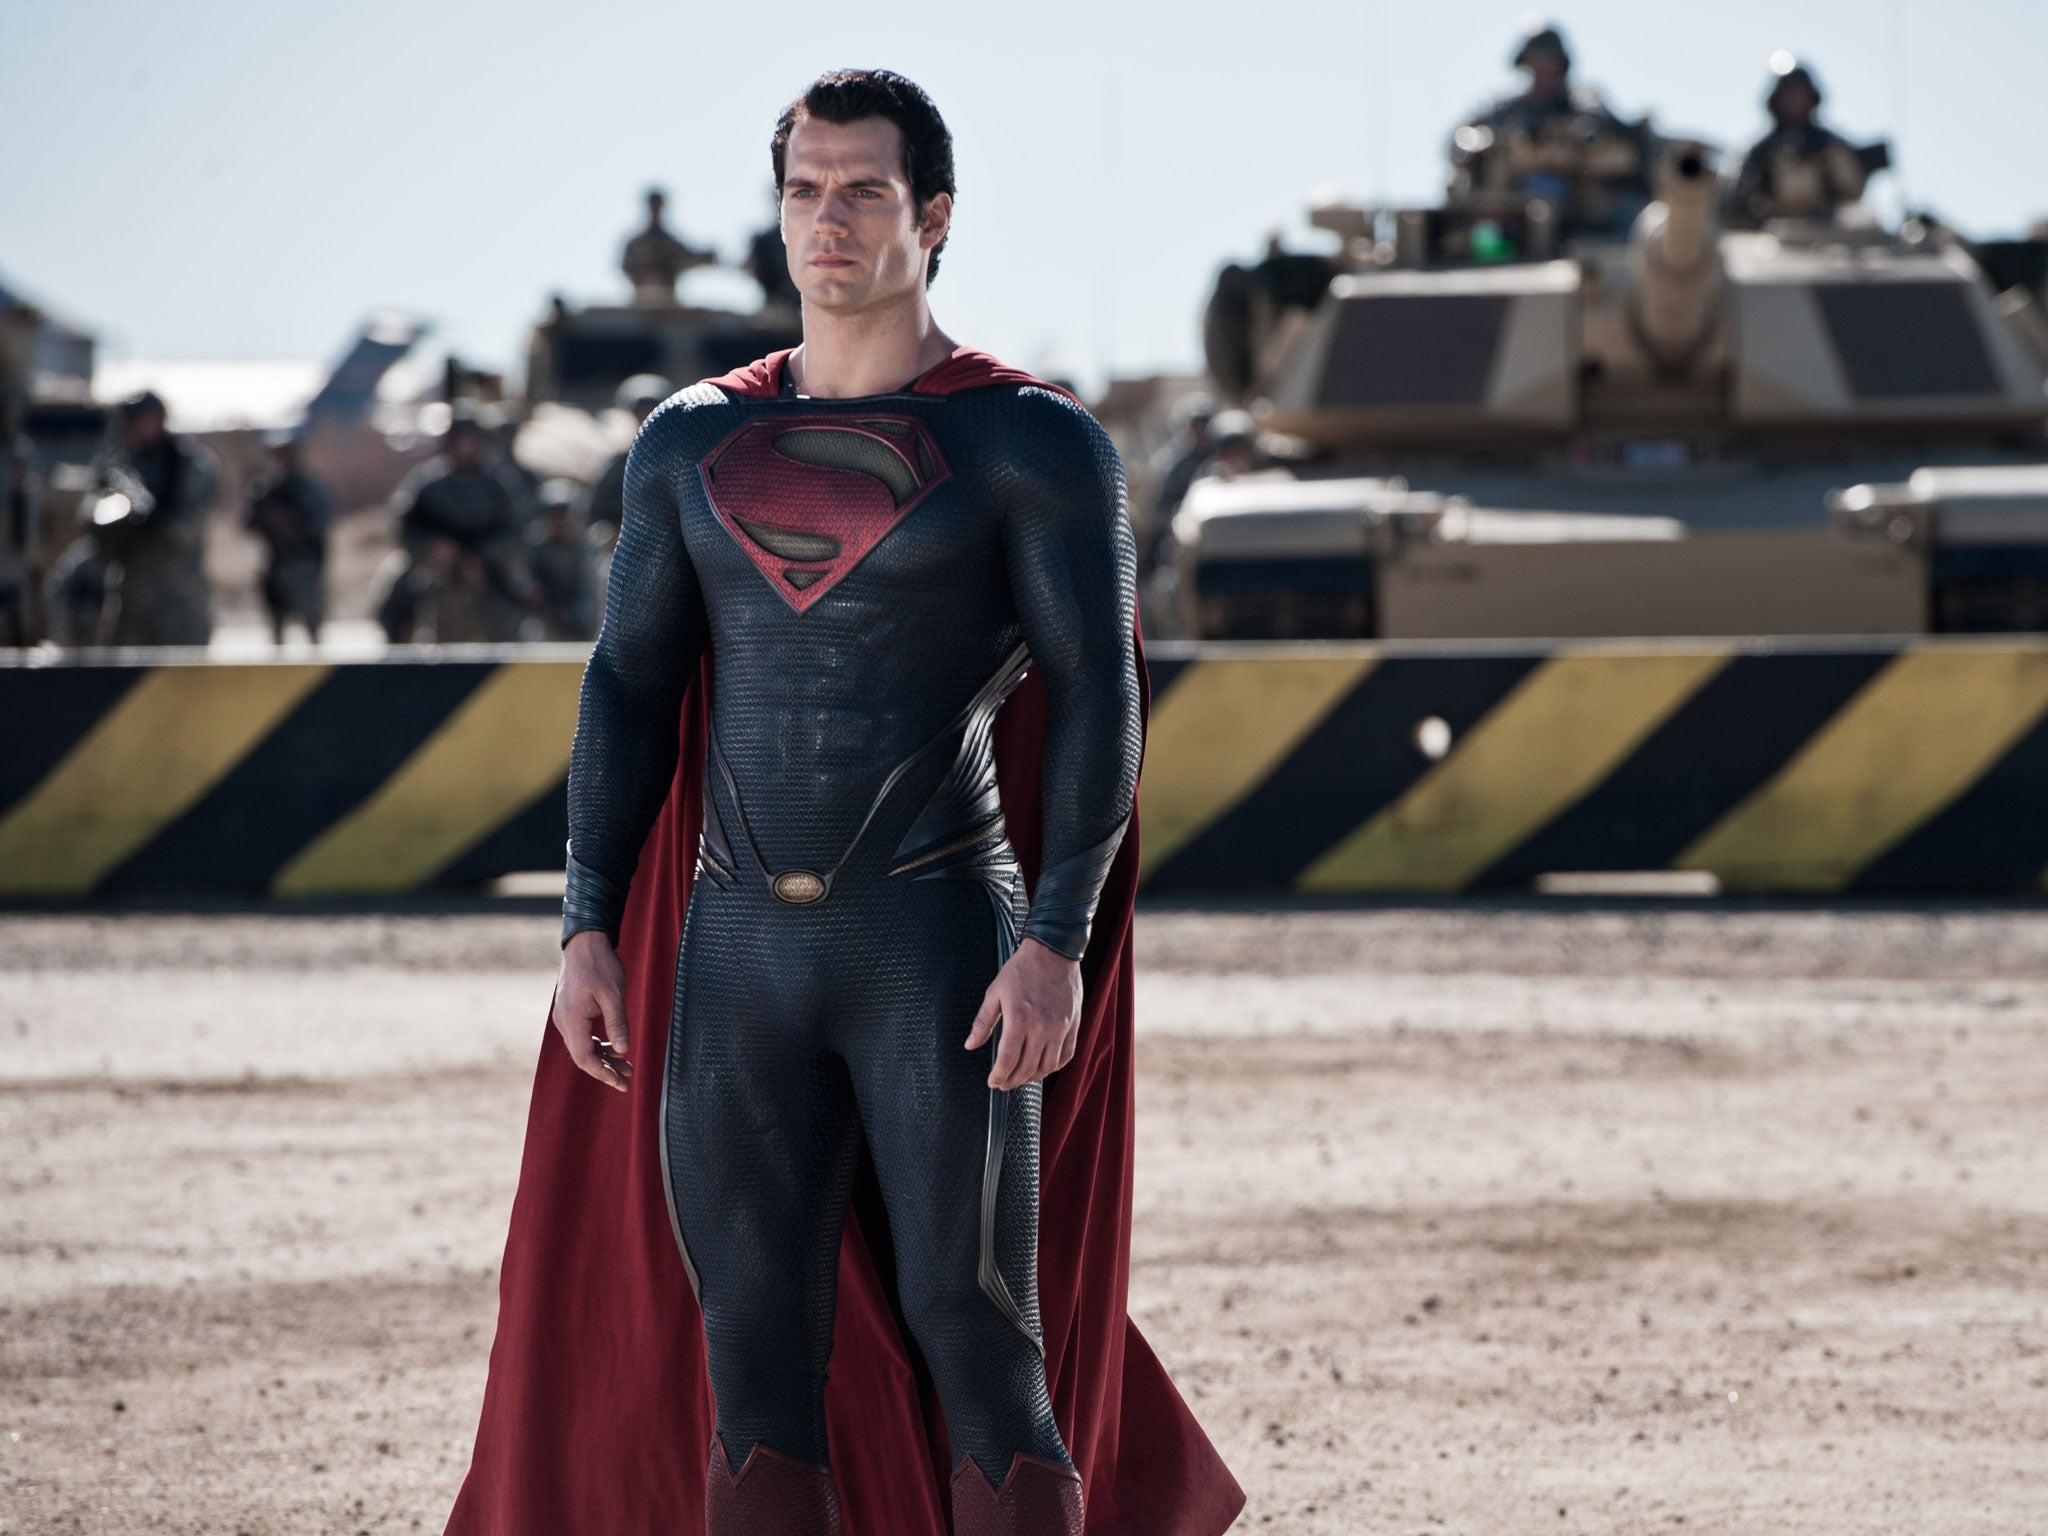 Even before it opens this week, ‘Man of Steel’ will have raked in $170m in deals